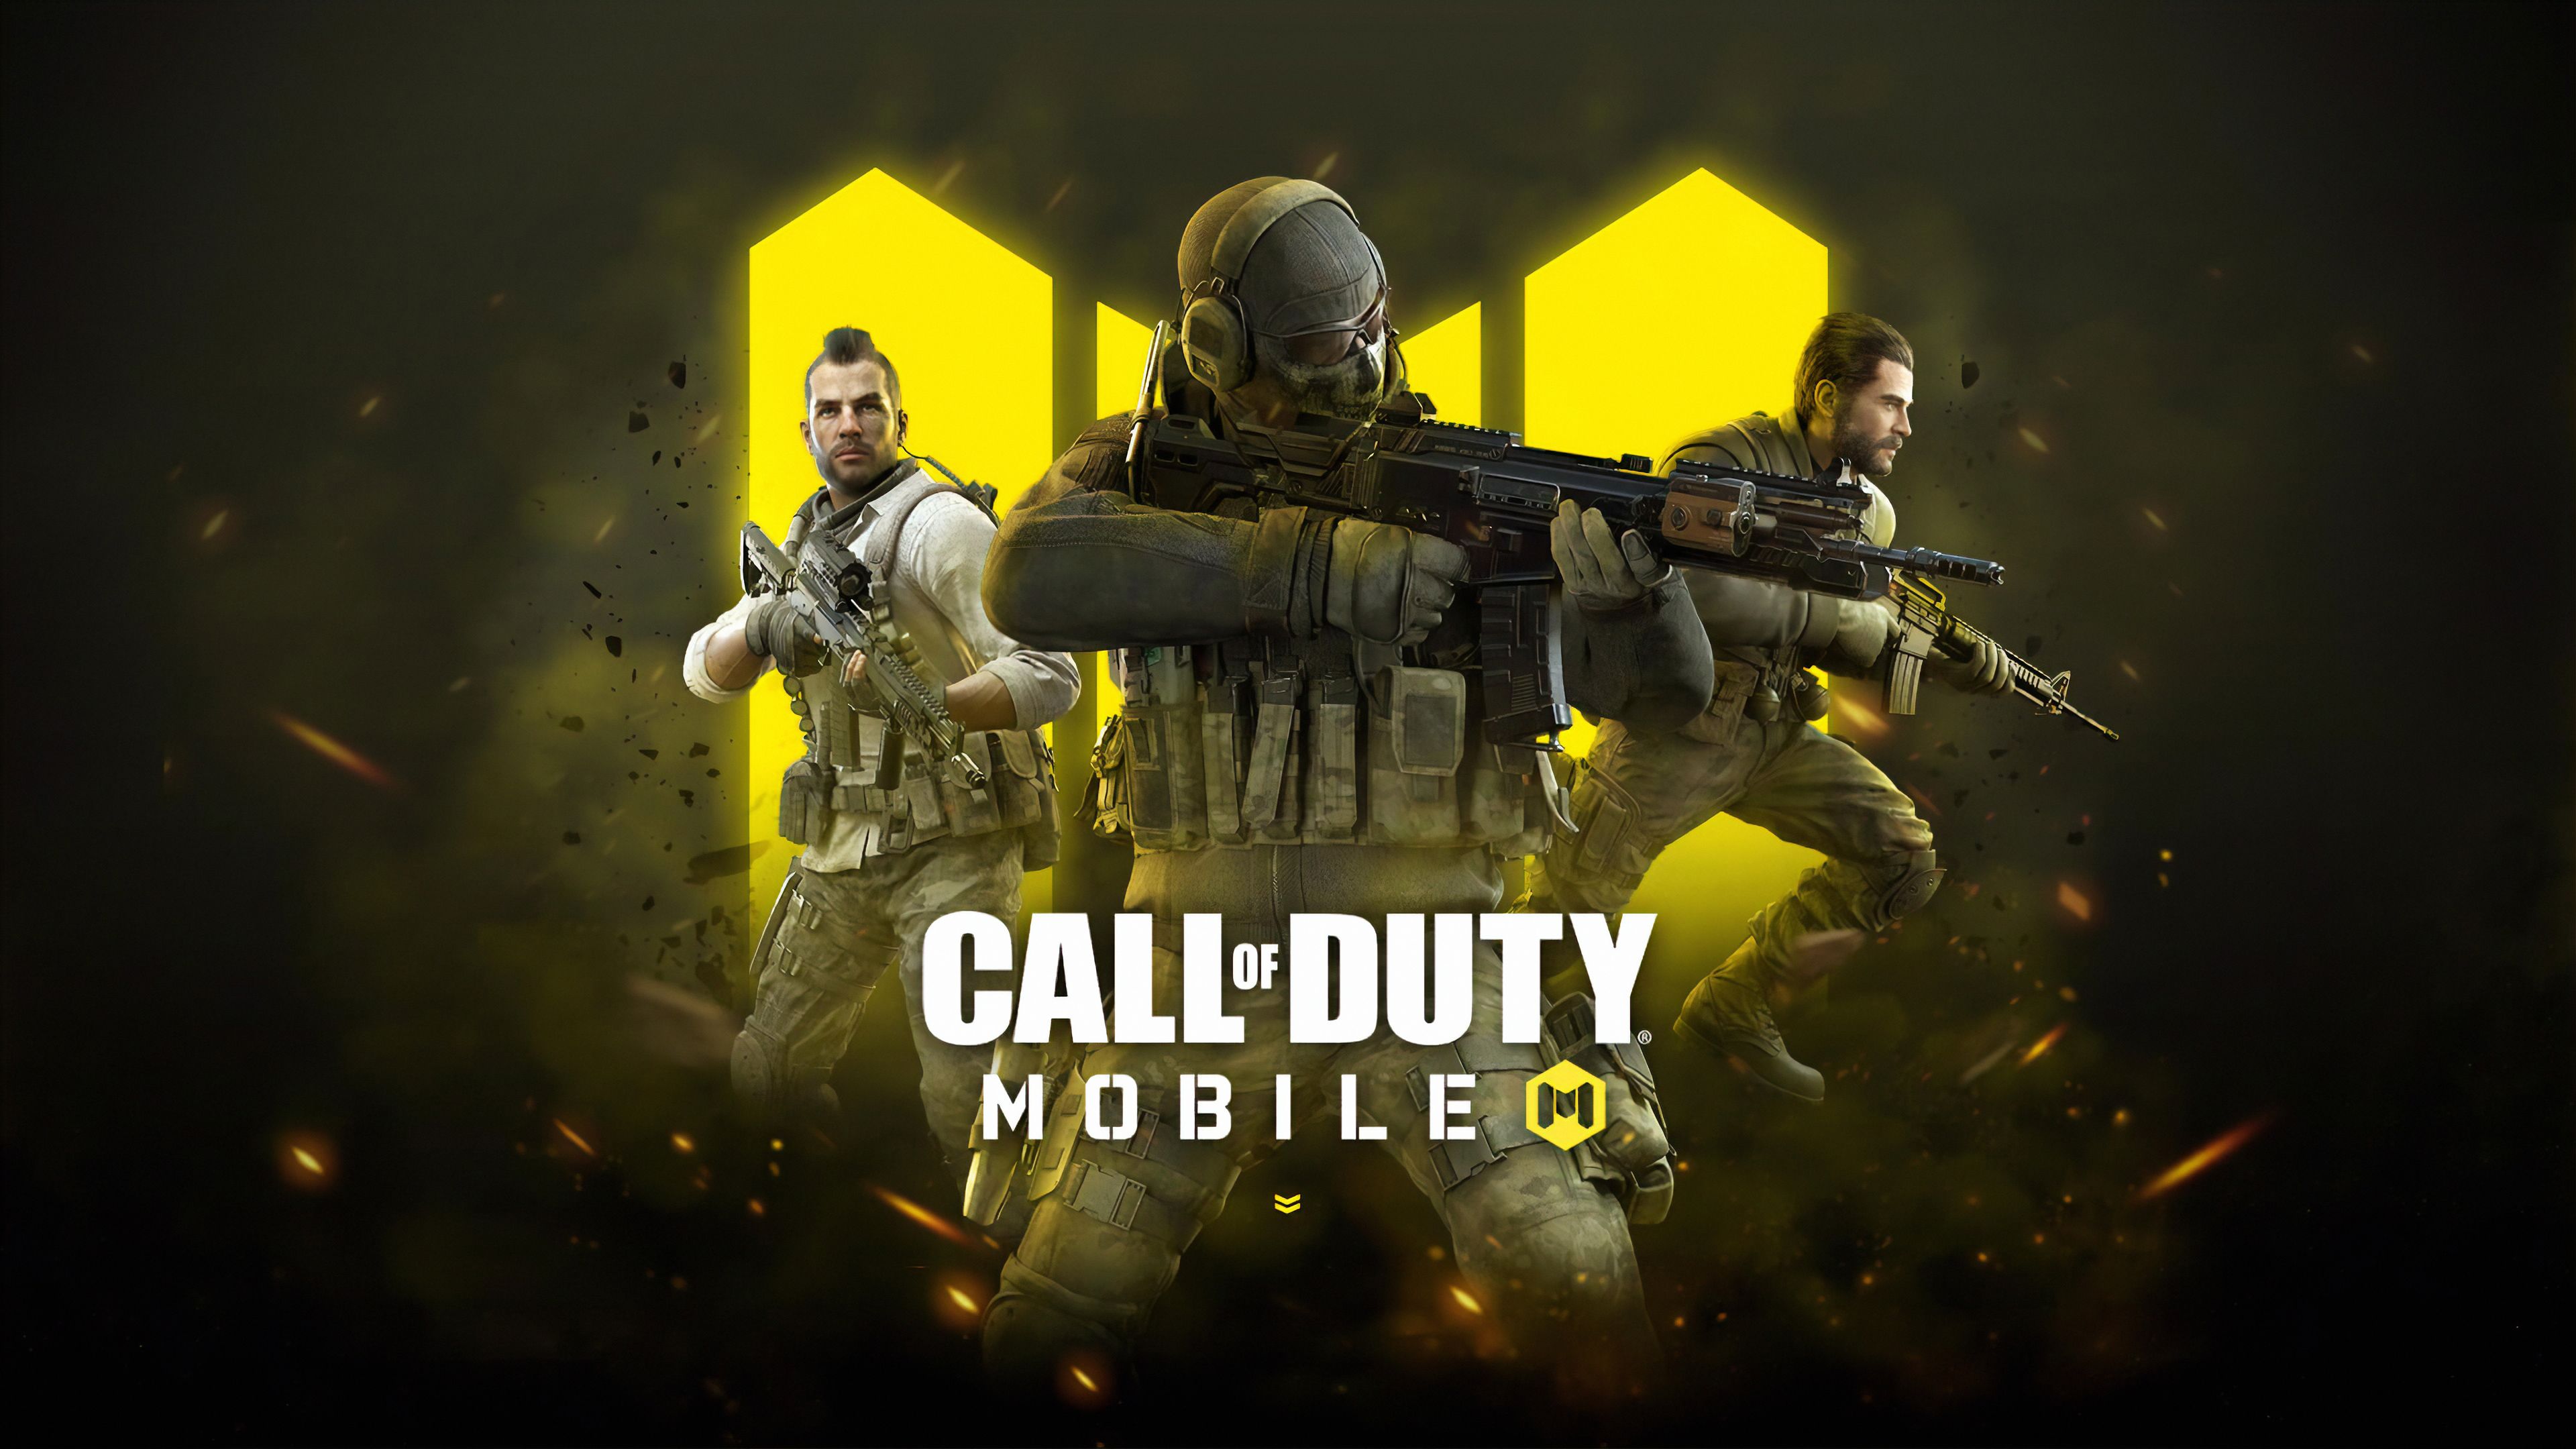 Call Of Duty Mobile Background and Movie